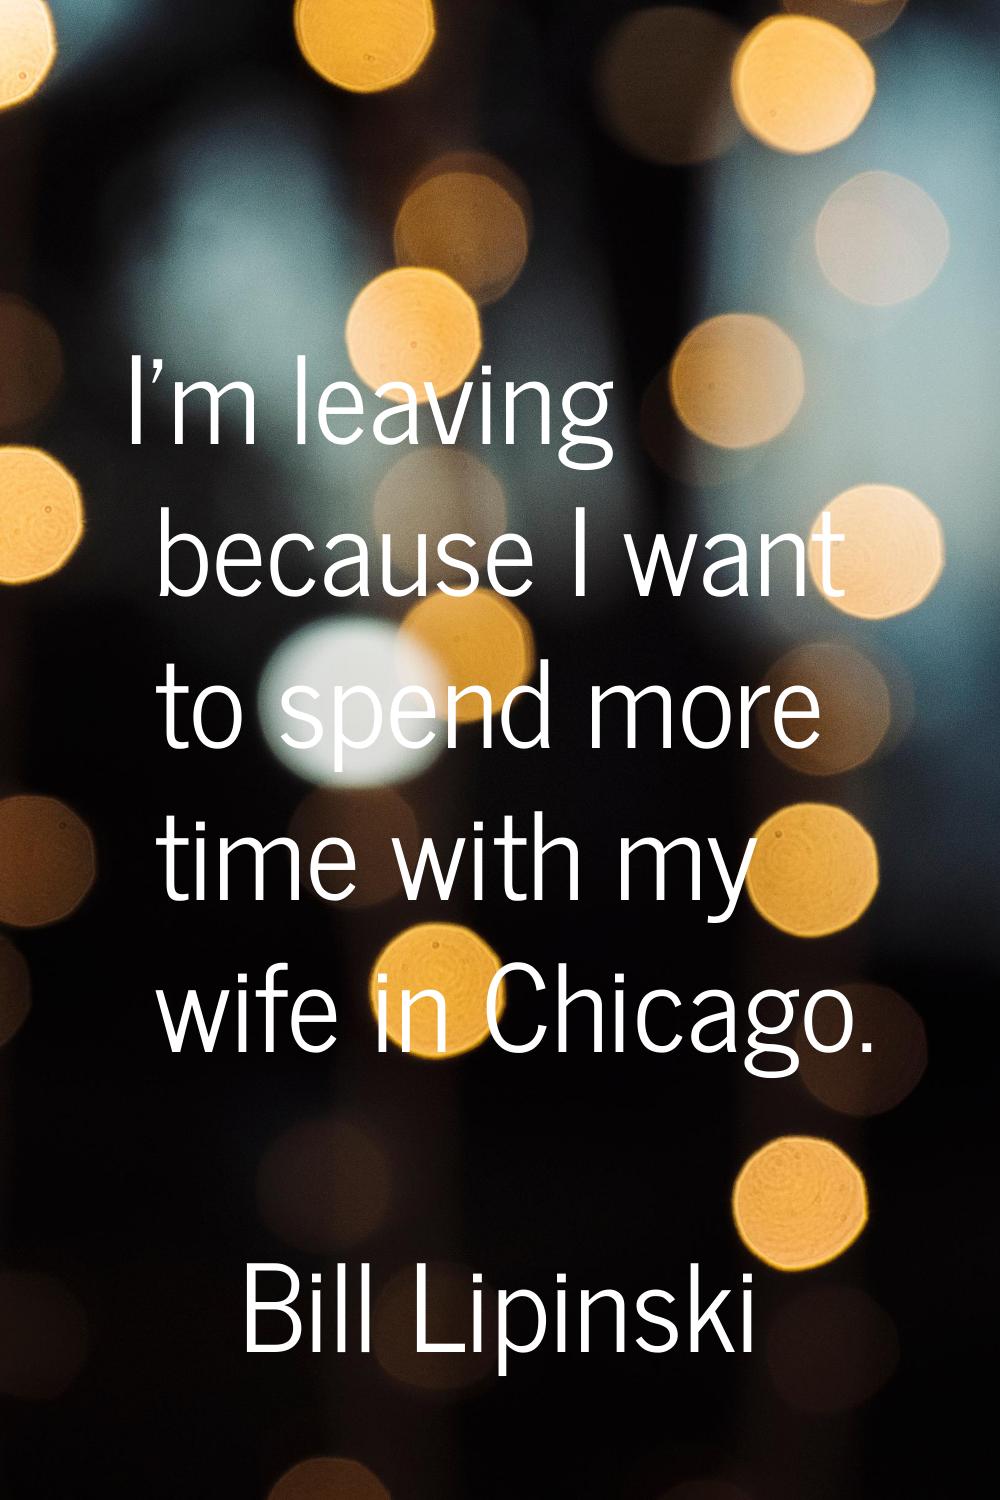 I'm leaving because I want to spend more time with my wife in Chicago.